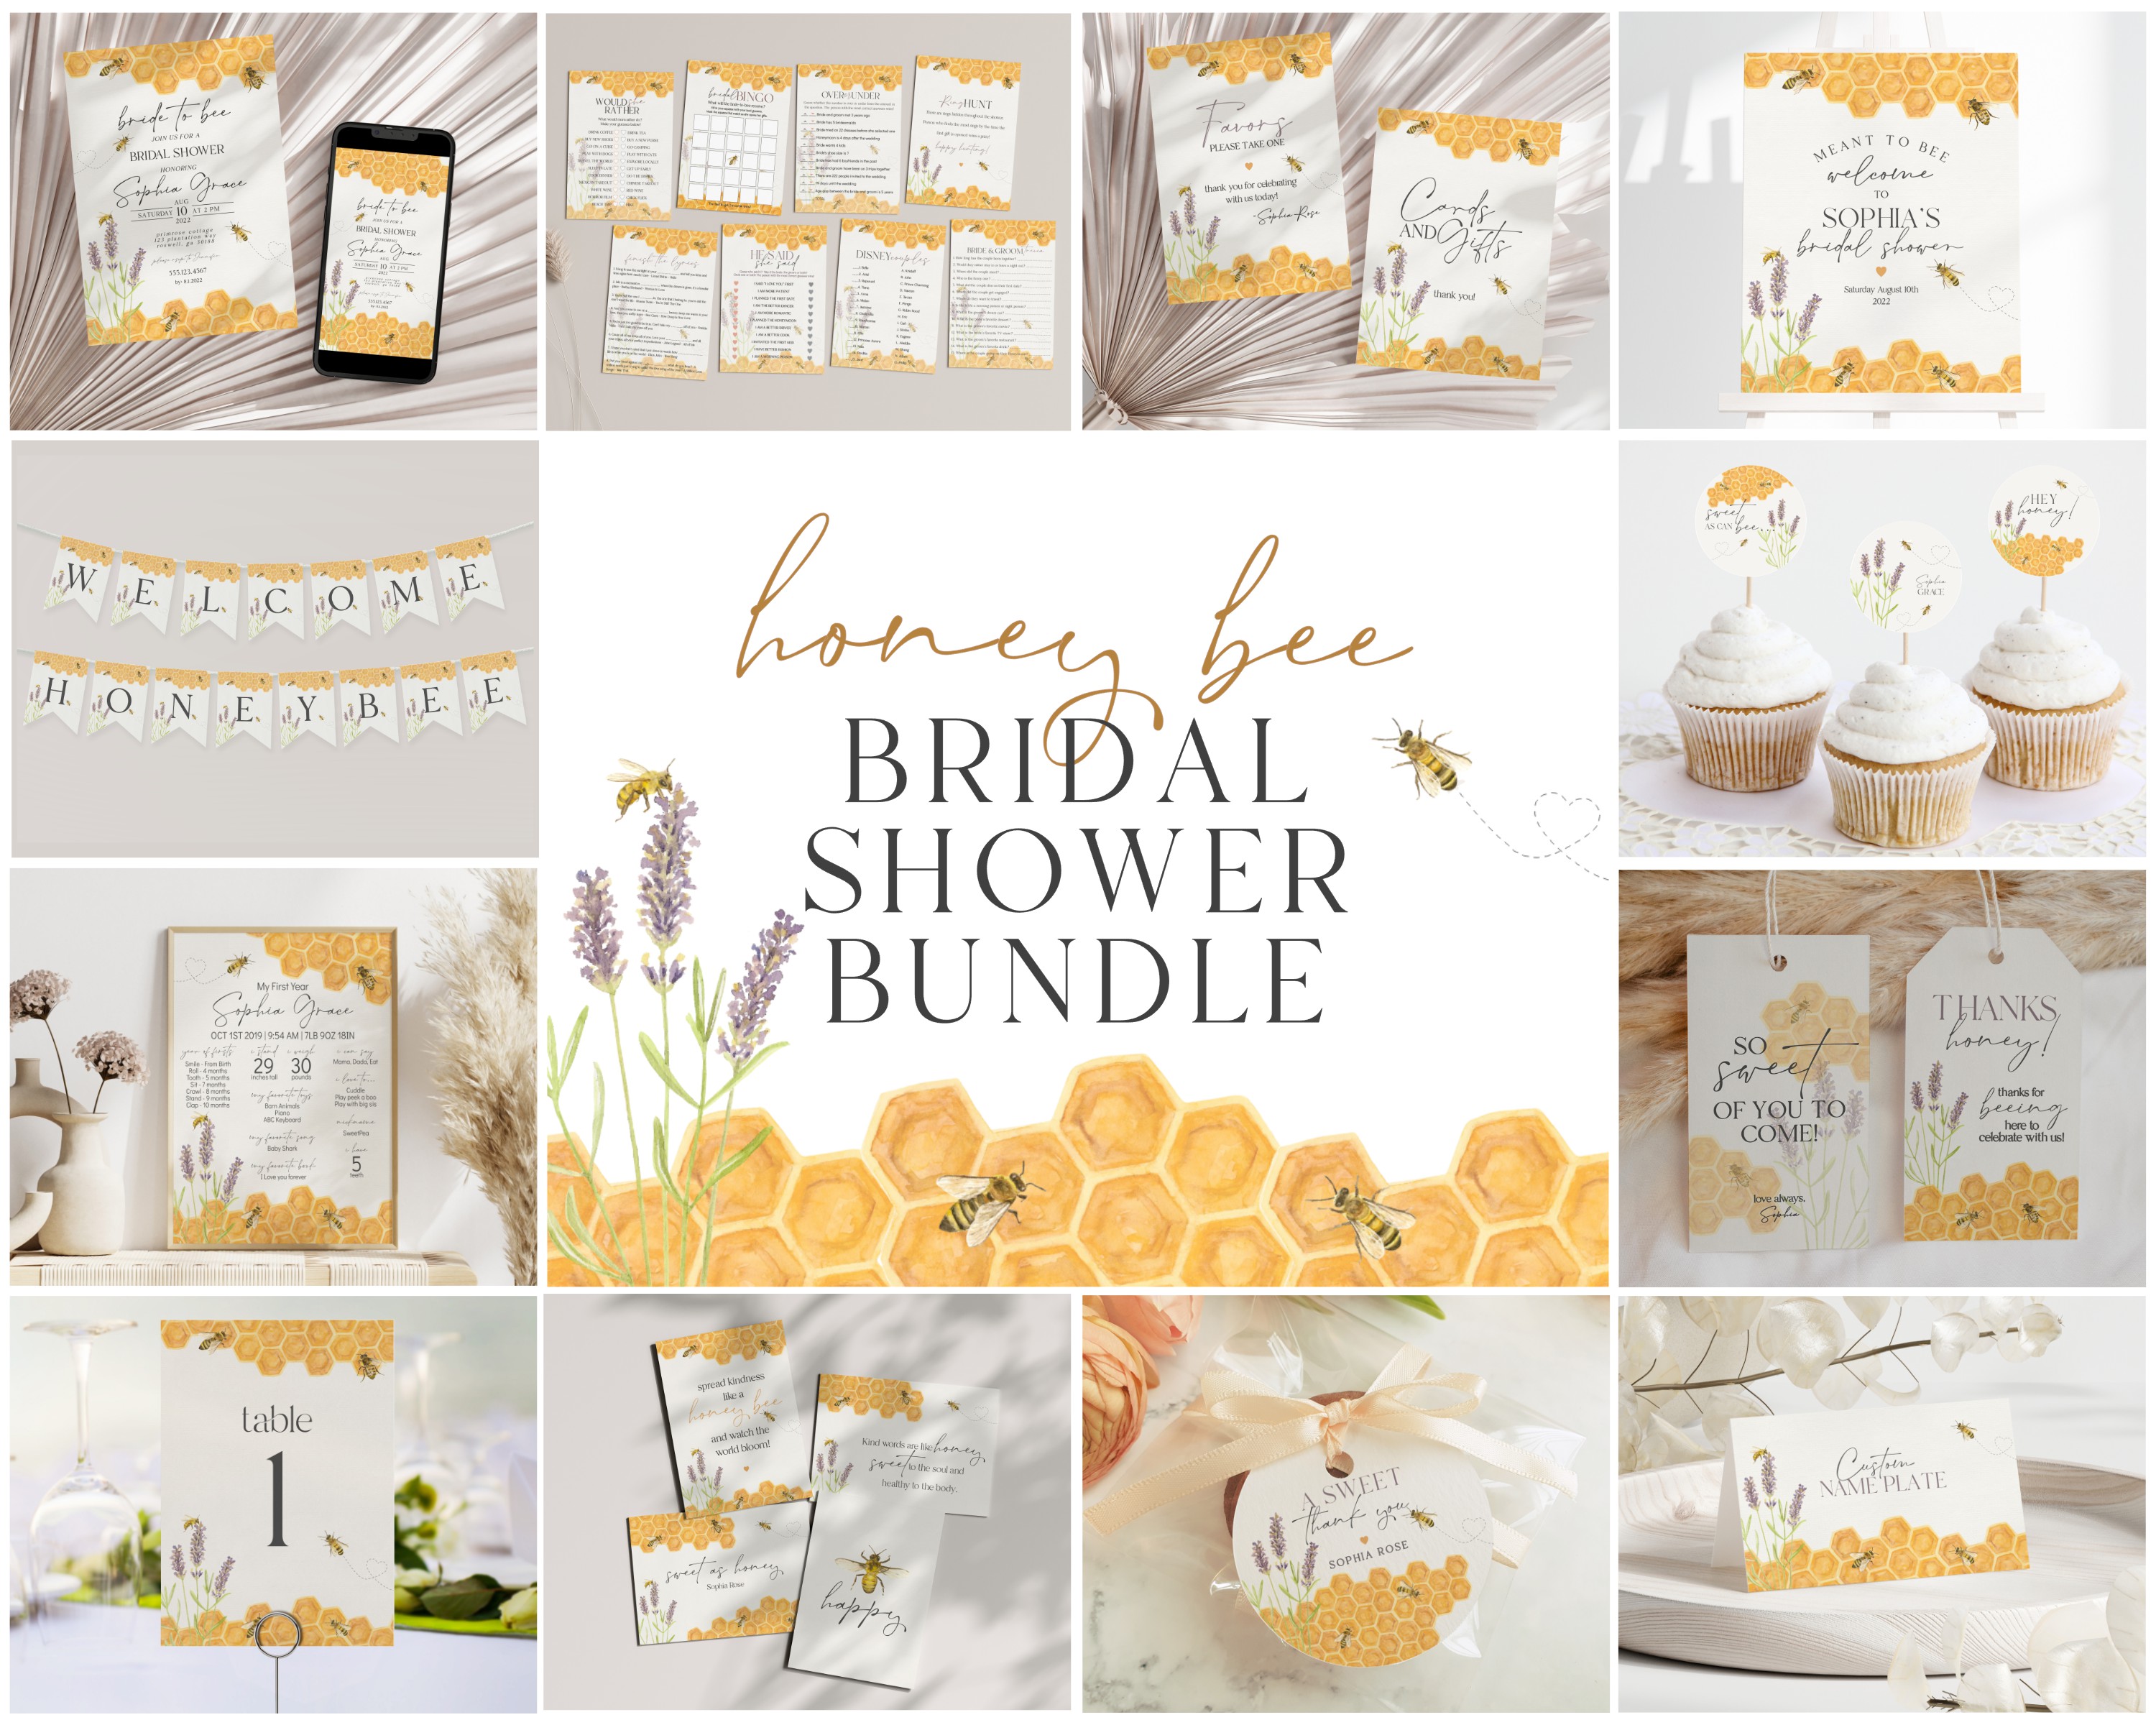 16 Honey Bee Themed Baby Shower Ideas for the Mommy to Bee